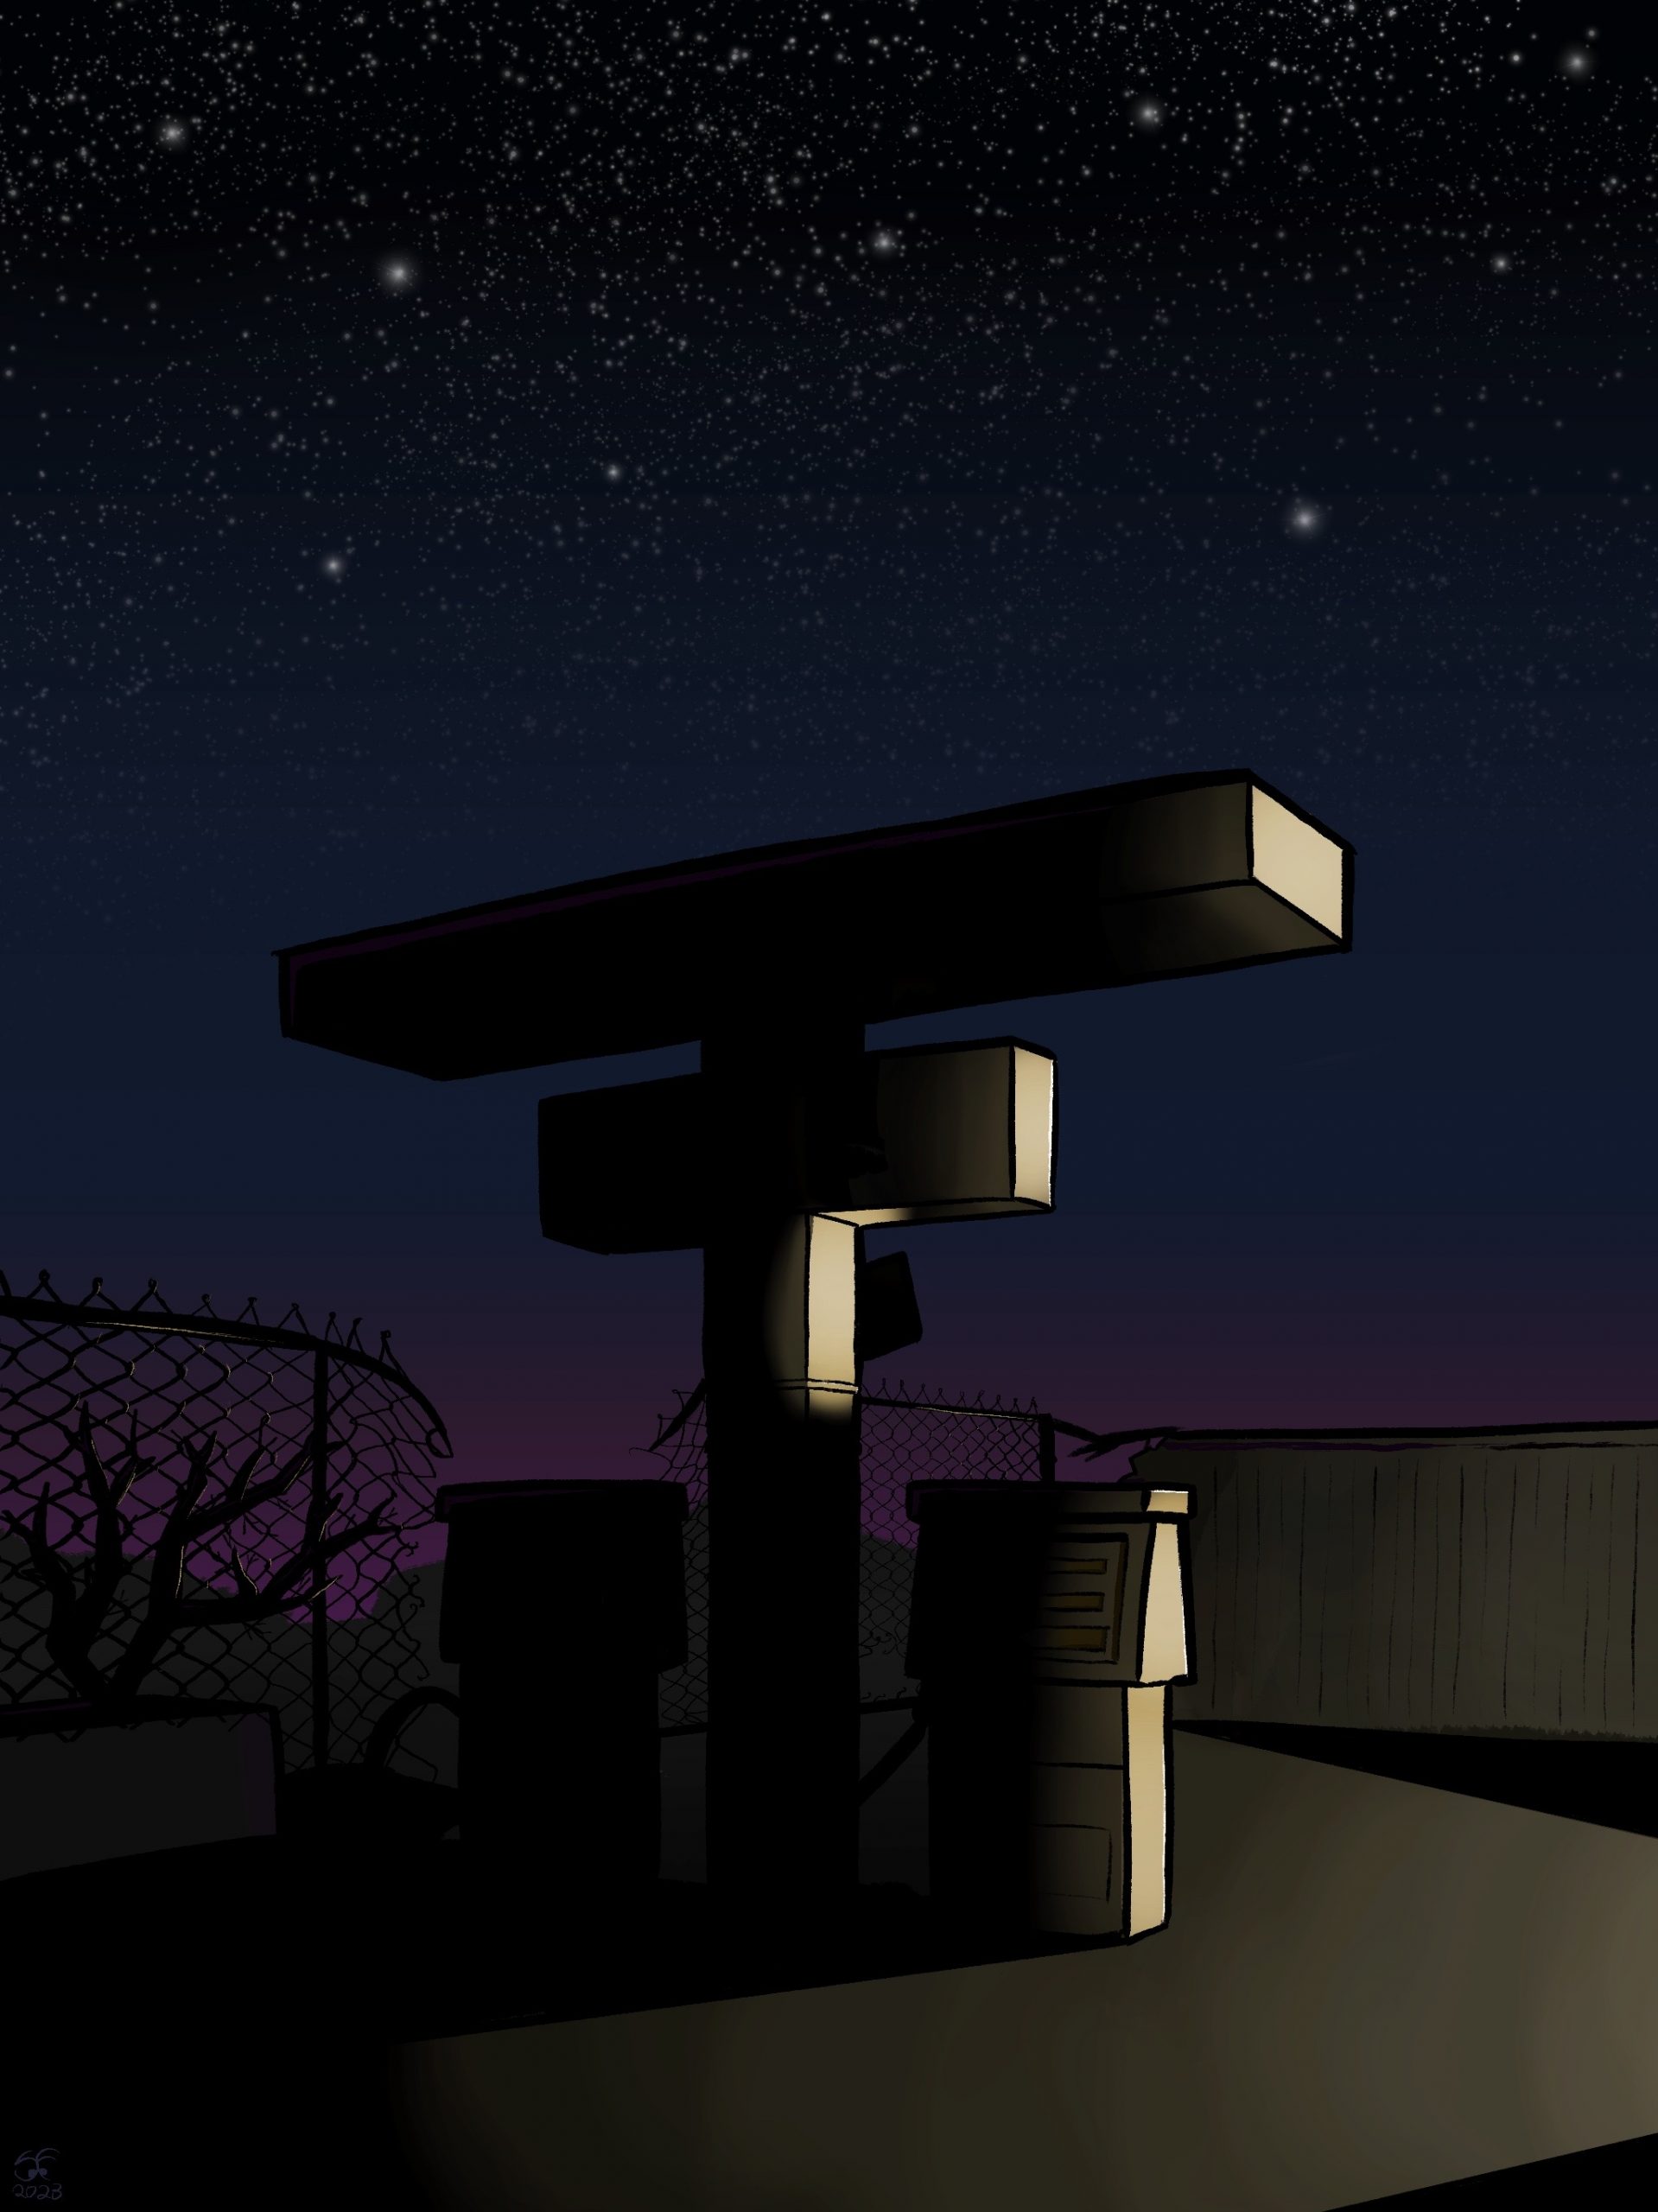 Illustration of a dark abandoned gas station in the middle of nowhere that is being lit from the right by approaching headlights